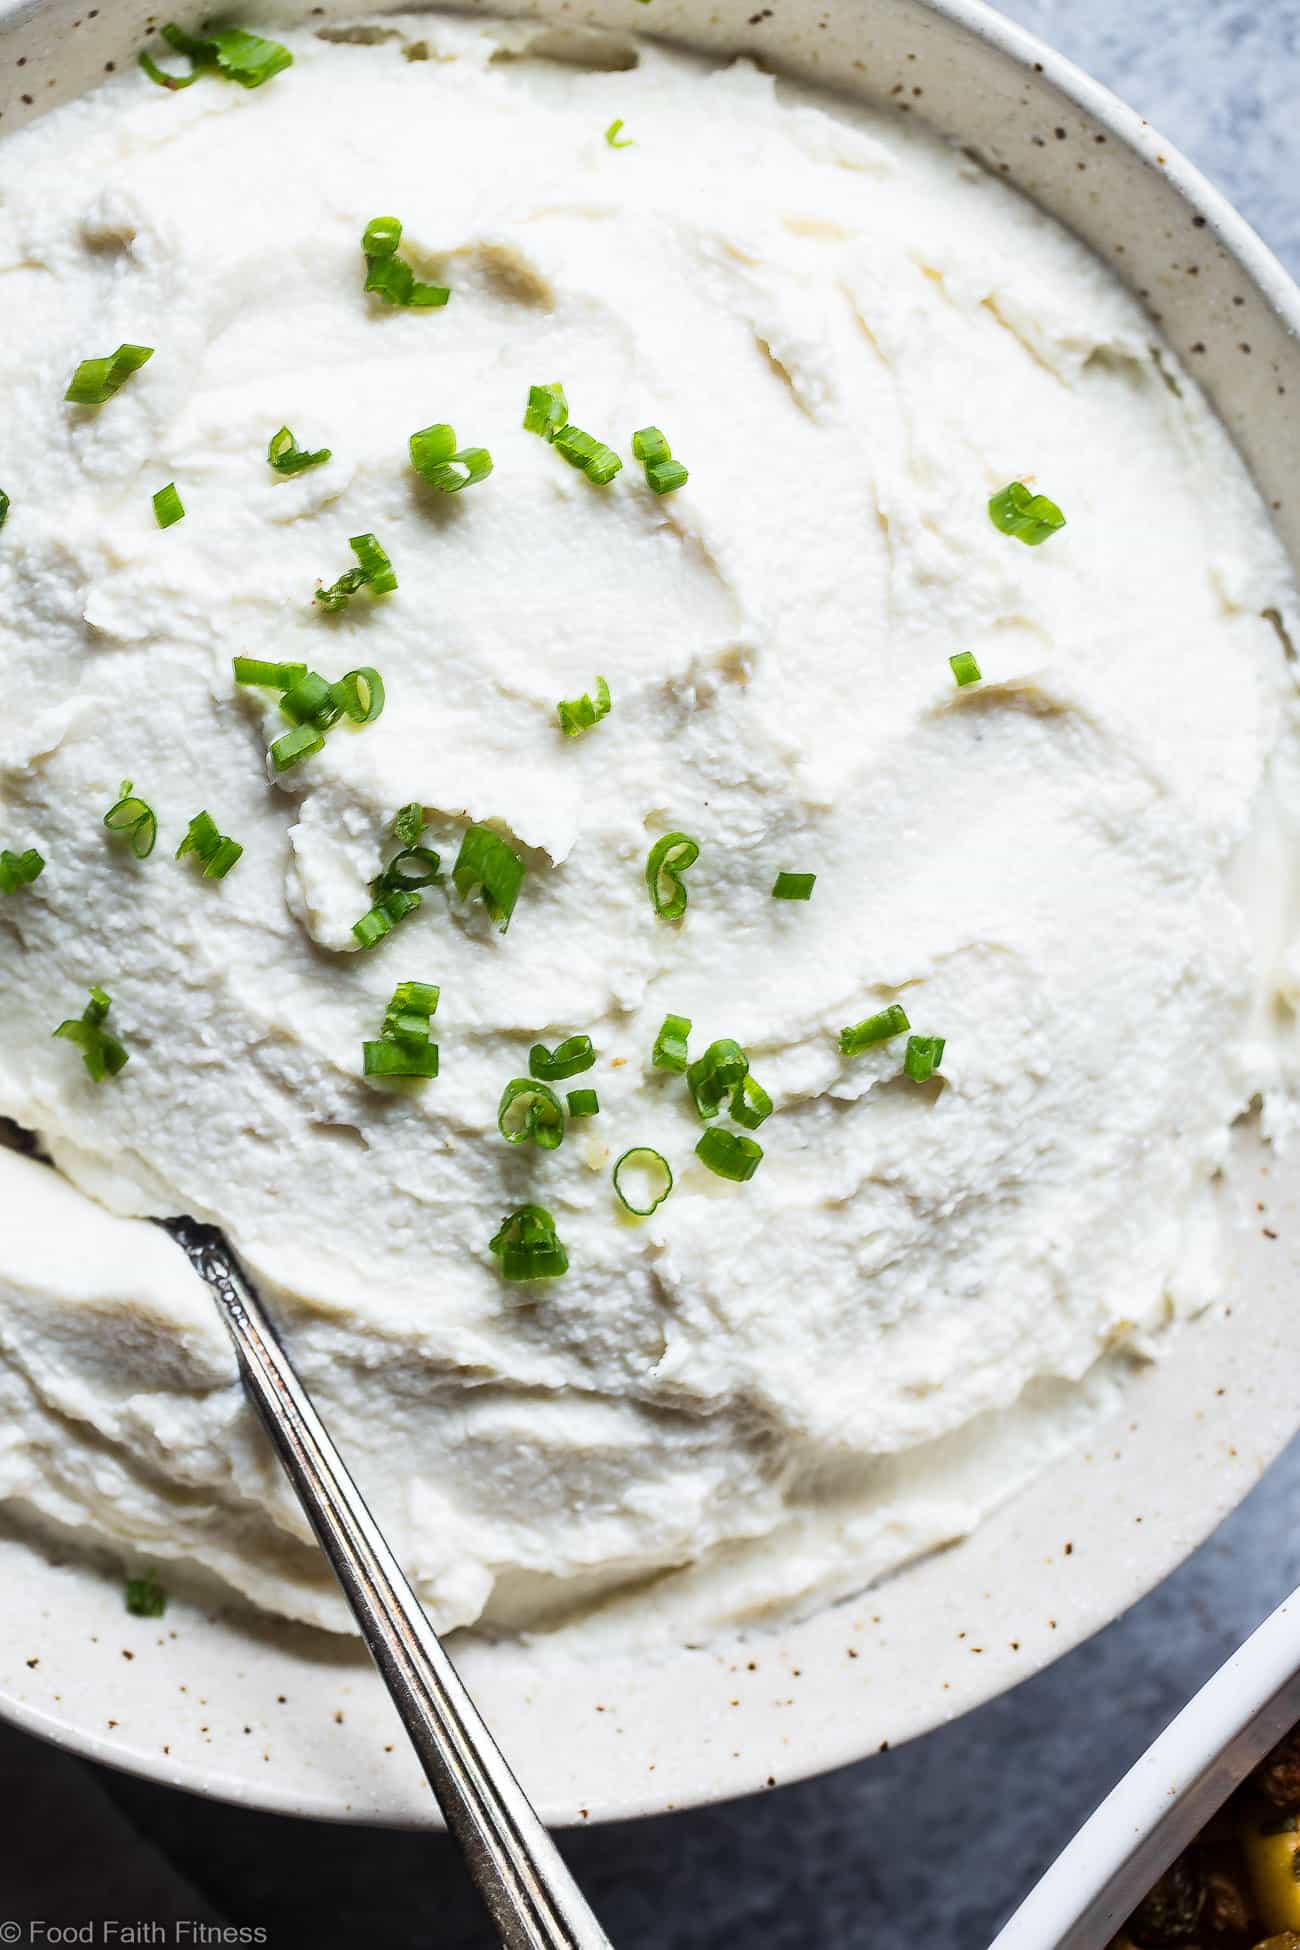  Healthy Garlic Mashed Cauliflower Potatoes - These 4 ingredient, keto"potatoes" are a vegan, gluten free and low carb side dish! They're only 70 calories, 2 Smartpoints and are a great way to get kids to eat veggies!  Perfect for Thanksgiving! | Foodfaithfitness.com | @FoodFaithFit